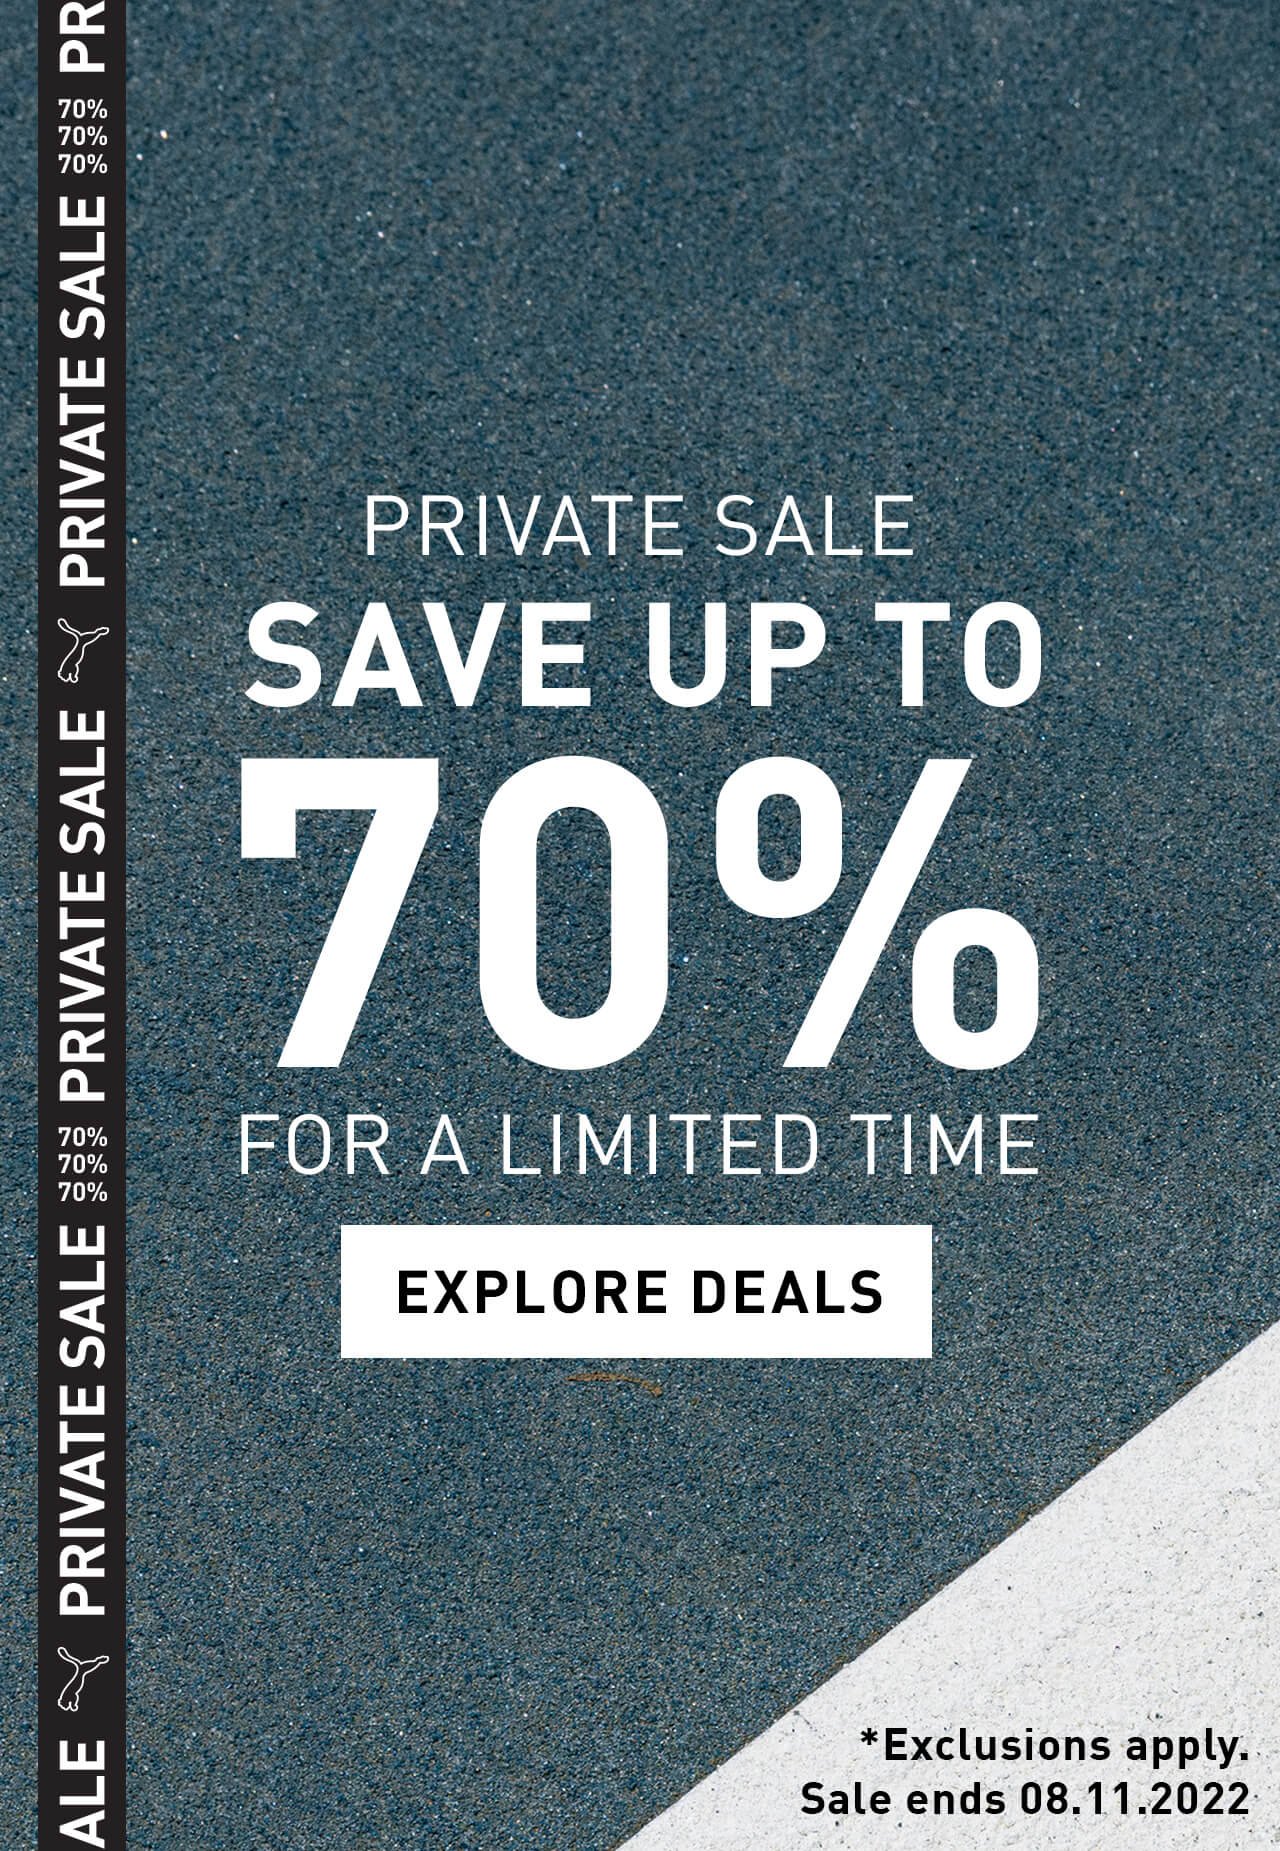 PRIVATE SALE | SAVE UP TO 70% FOR A LIMITED TIME | EXPLORE DEALS | *Exclusions apply. Sale ends 08.11.2022